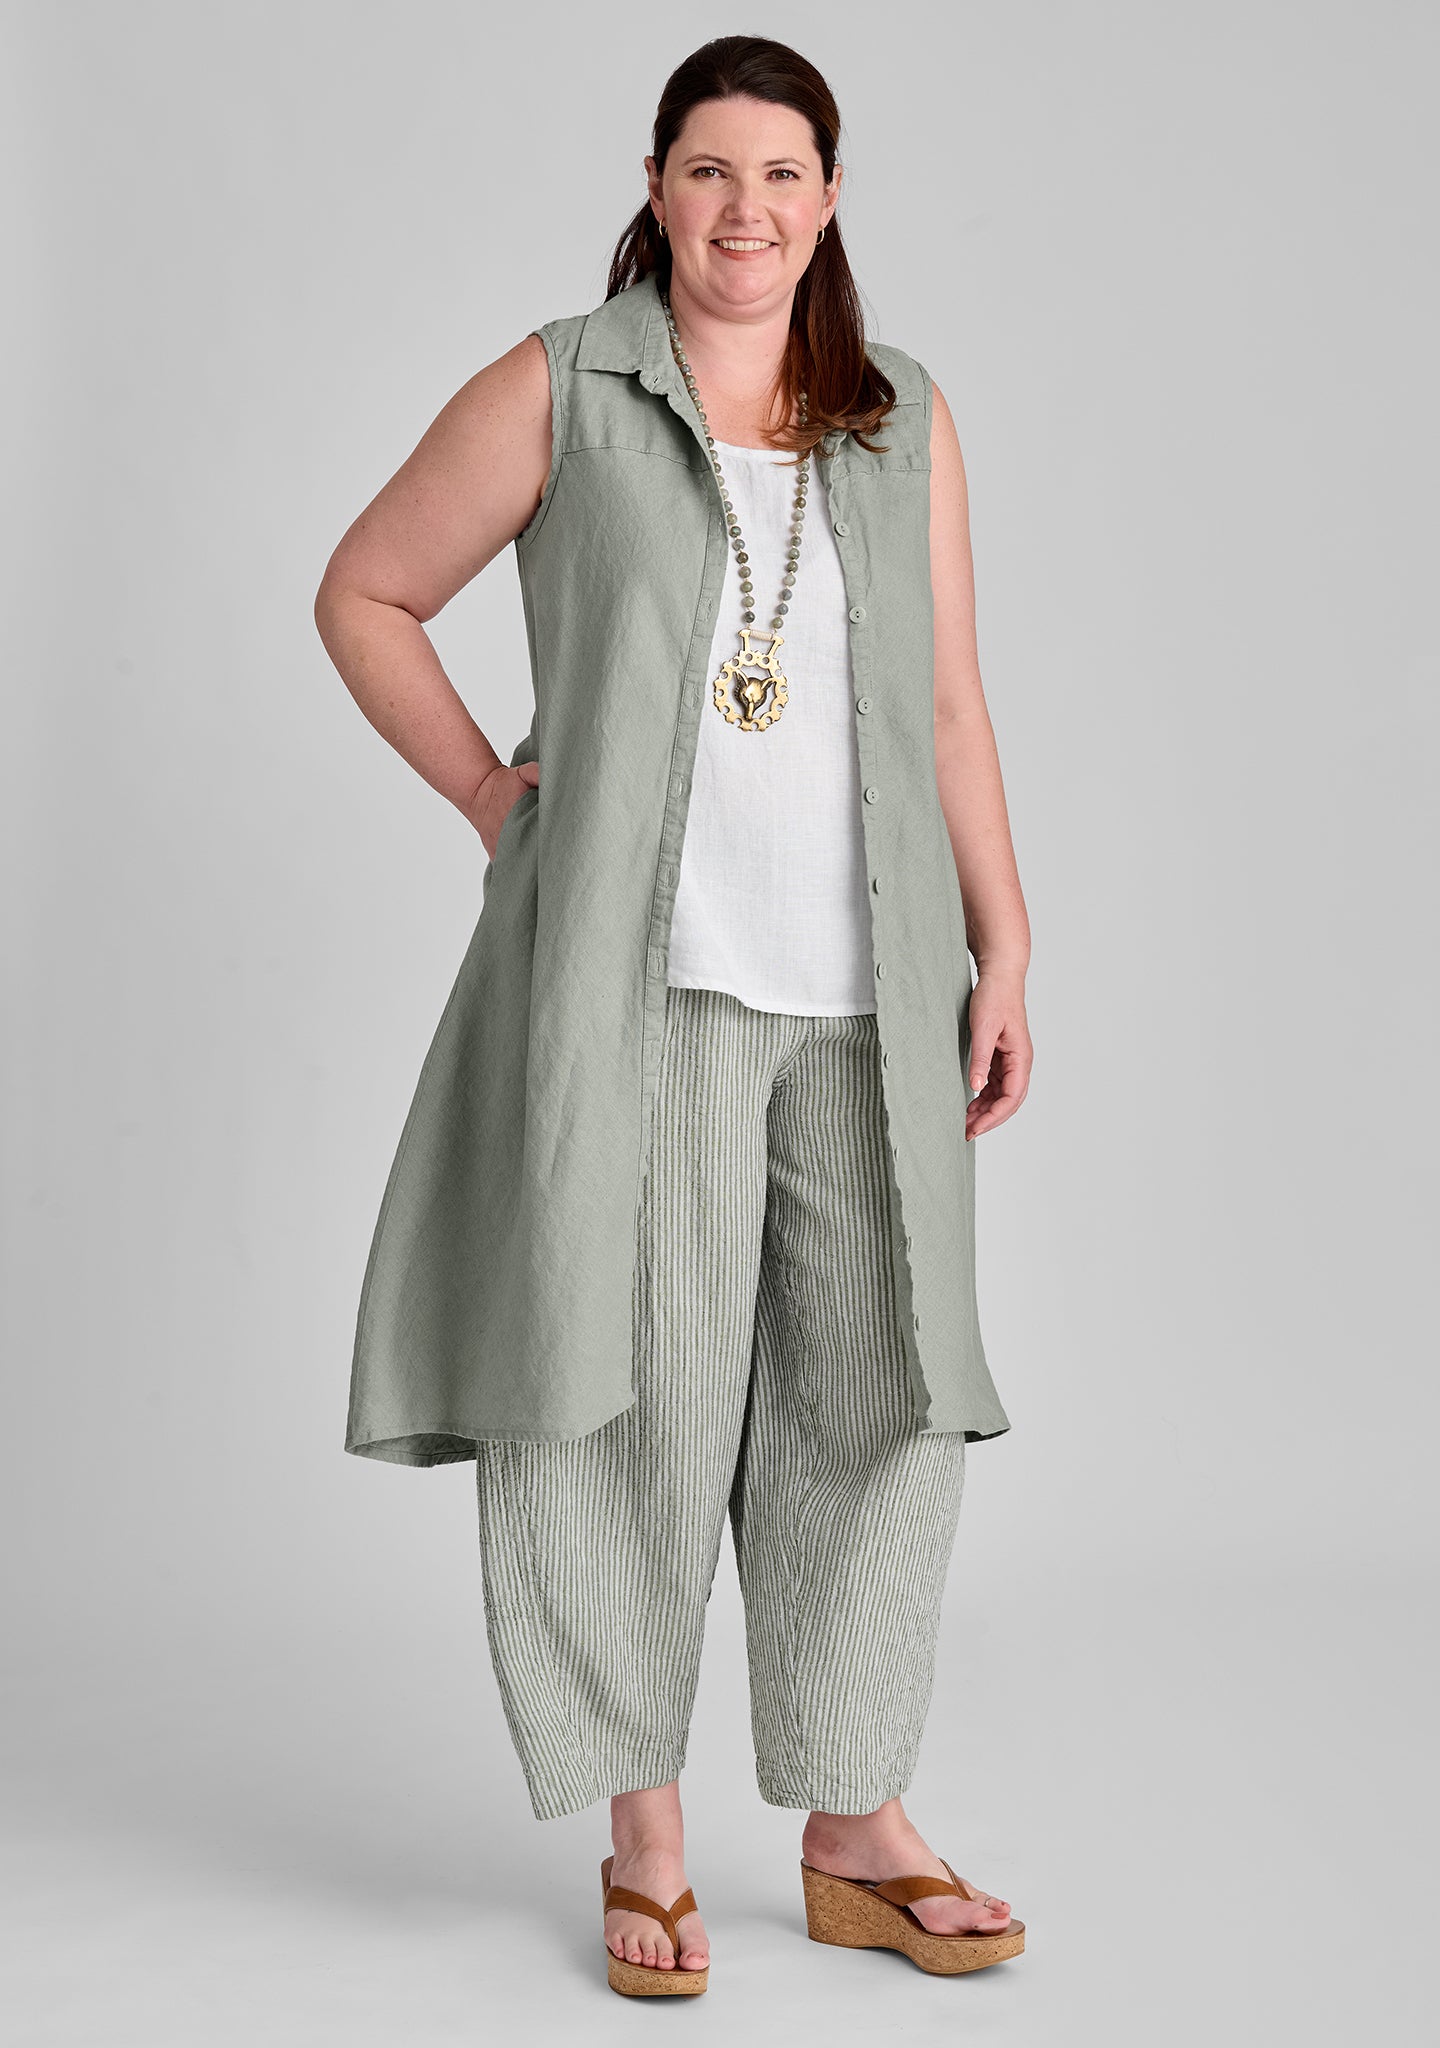 FLAX linen blouse in green with linen tank in white and linen pants in green